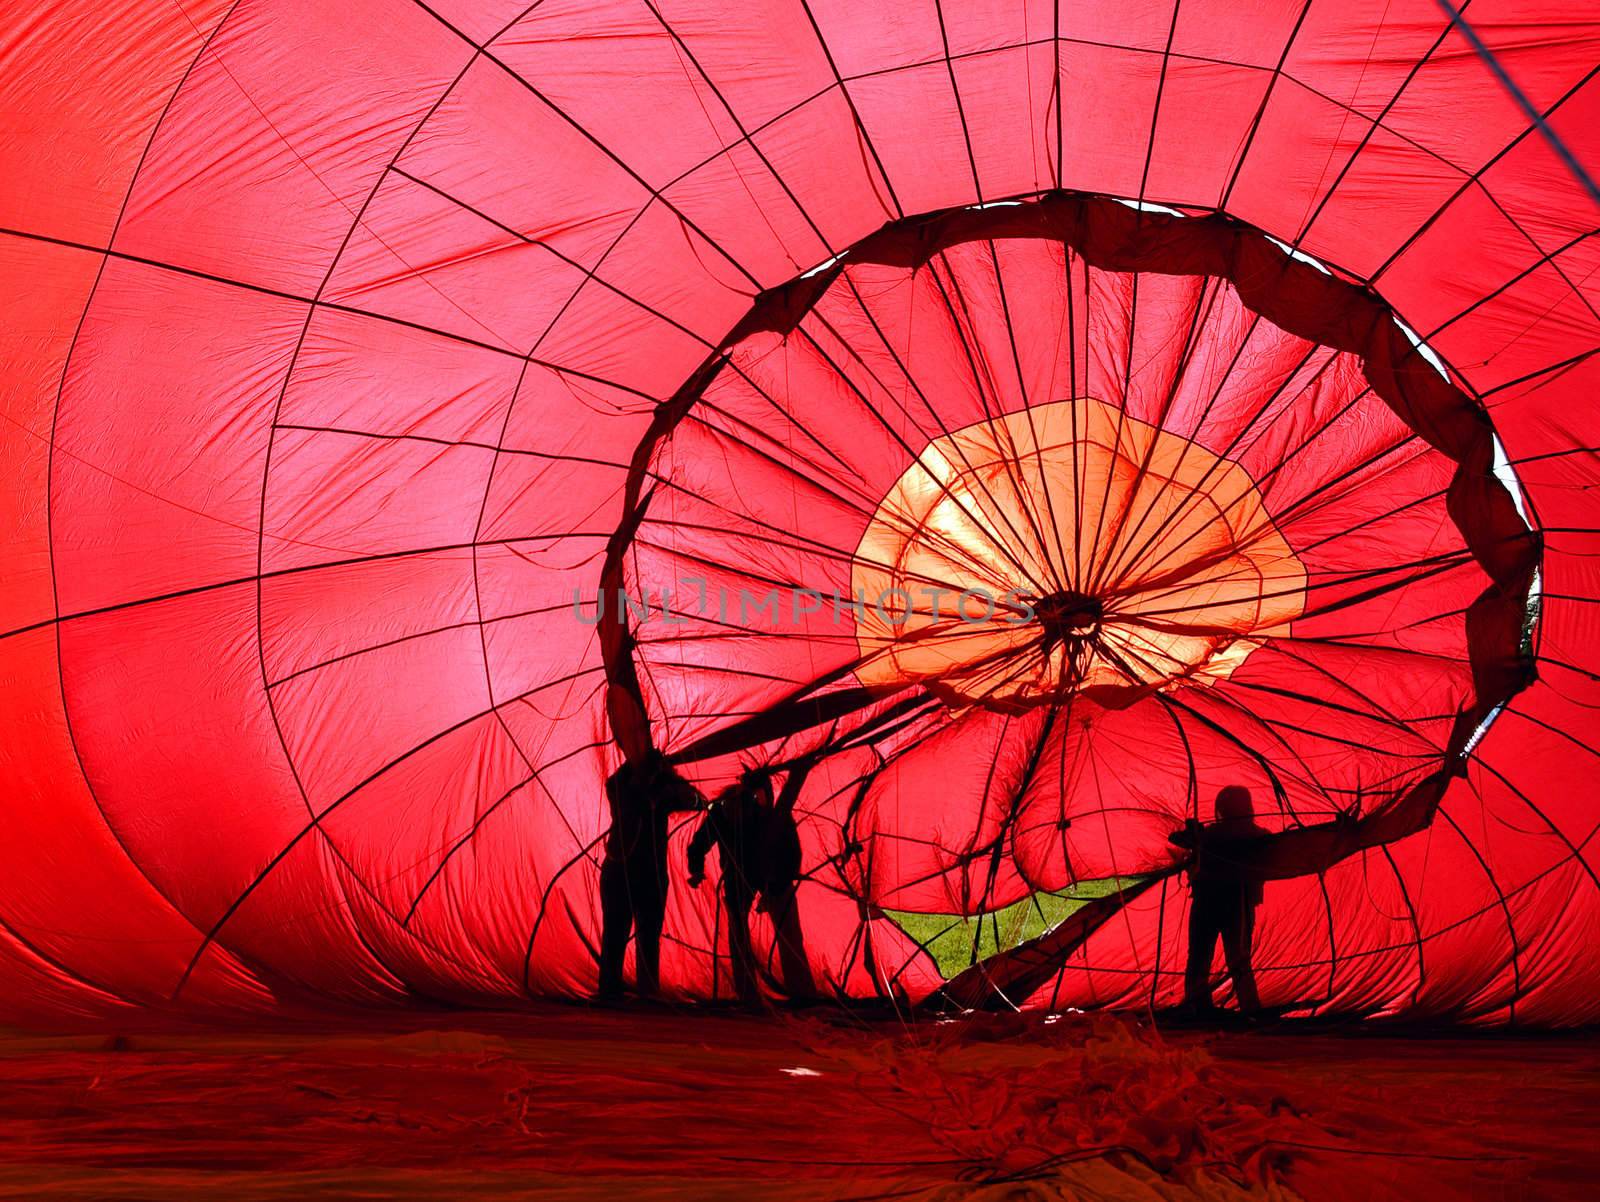 View of the inside of a red hot air balloon being infalated